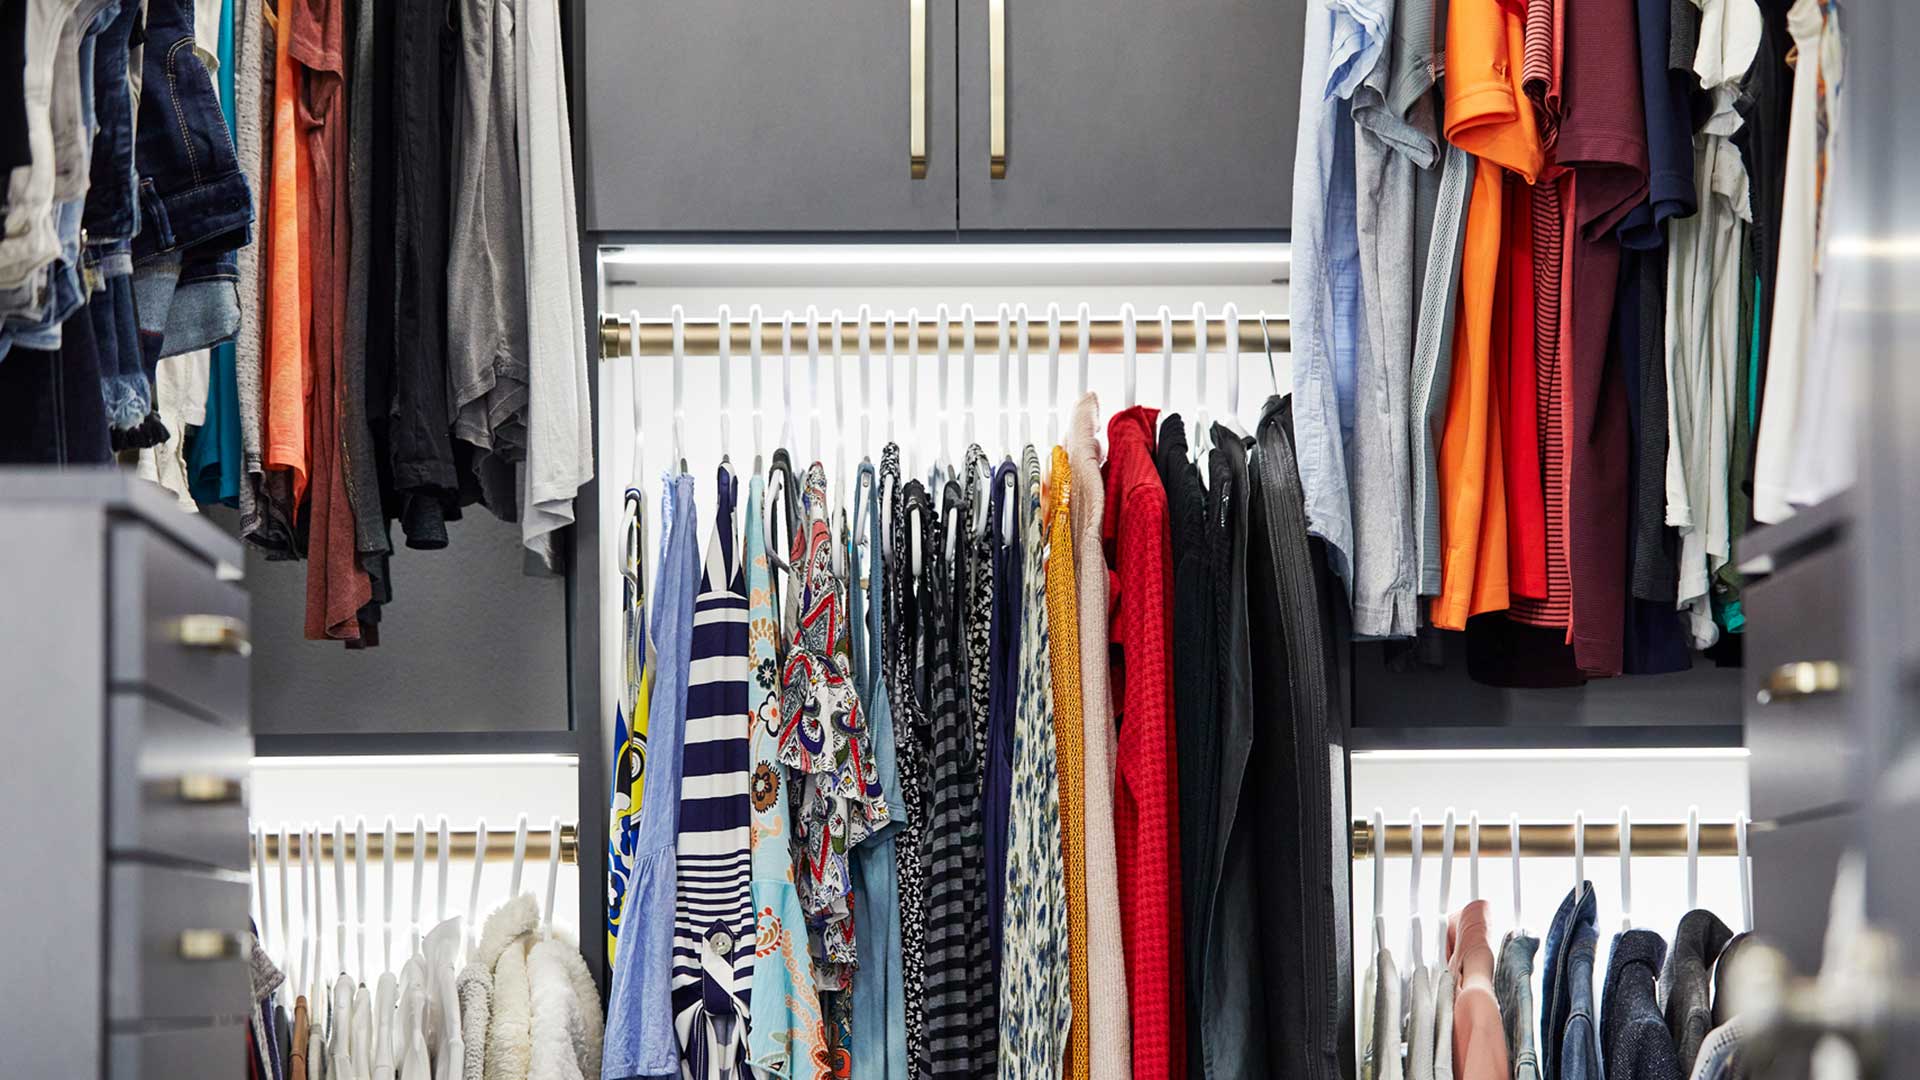 Closet showing hanging clothes